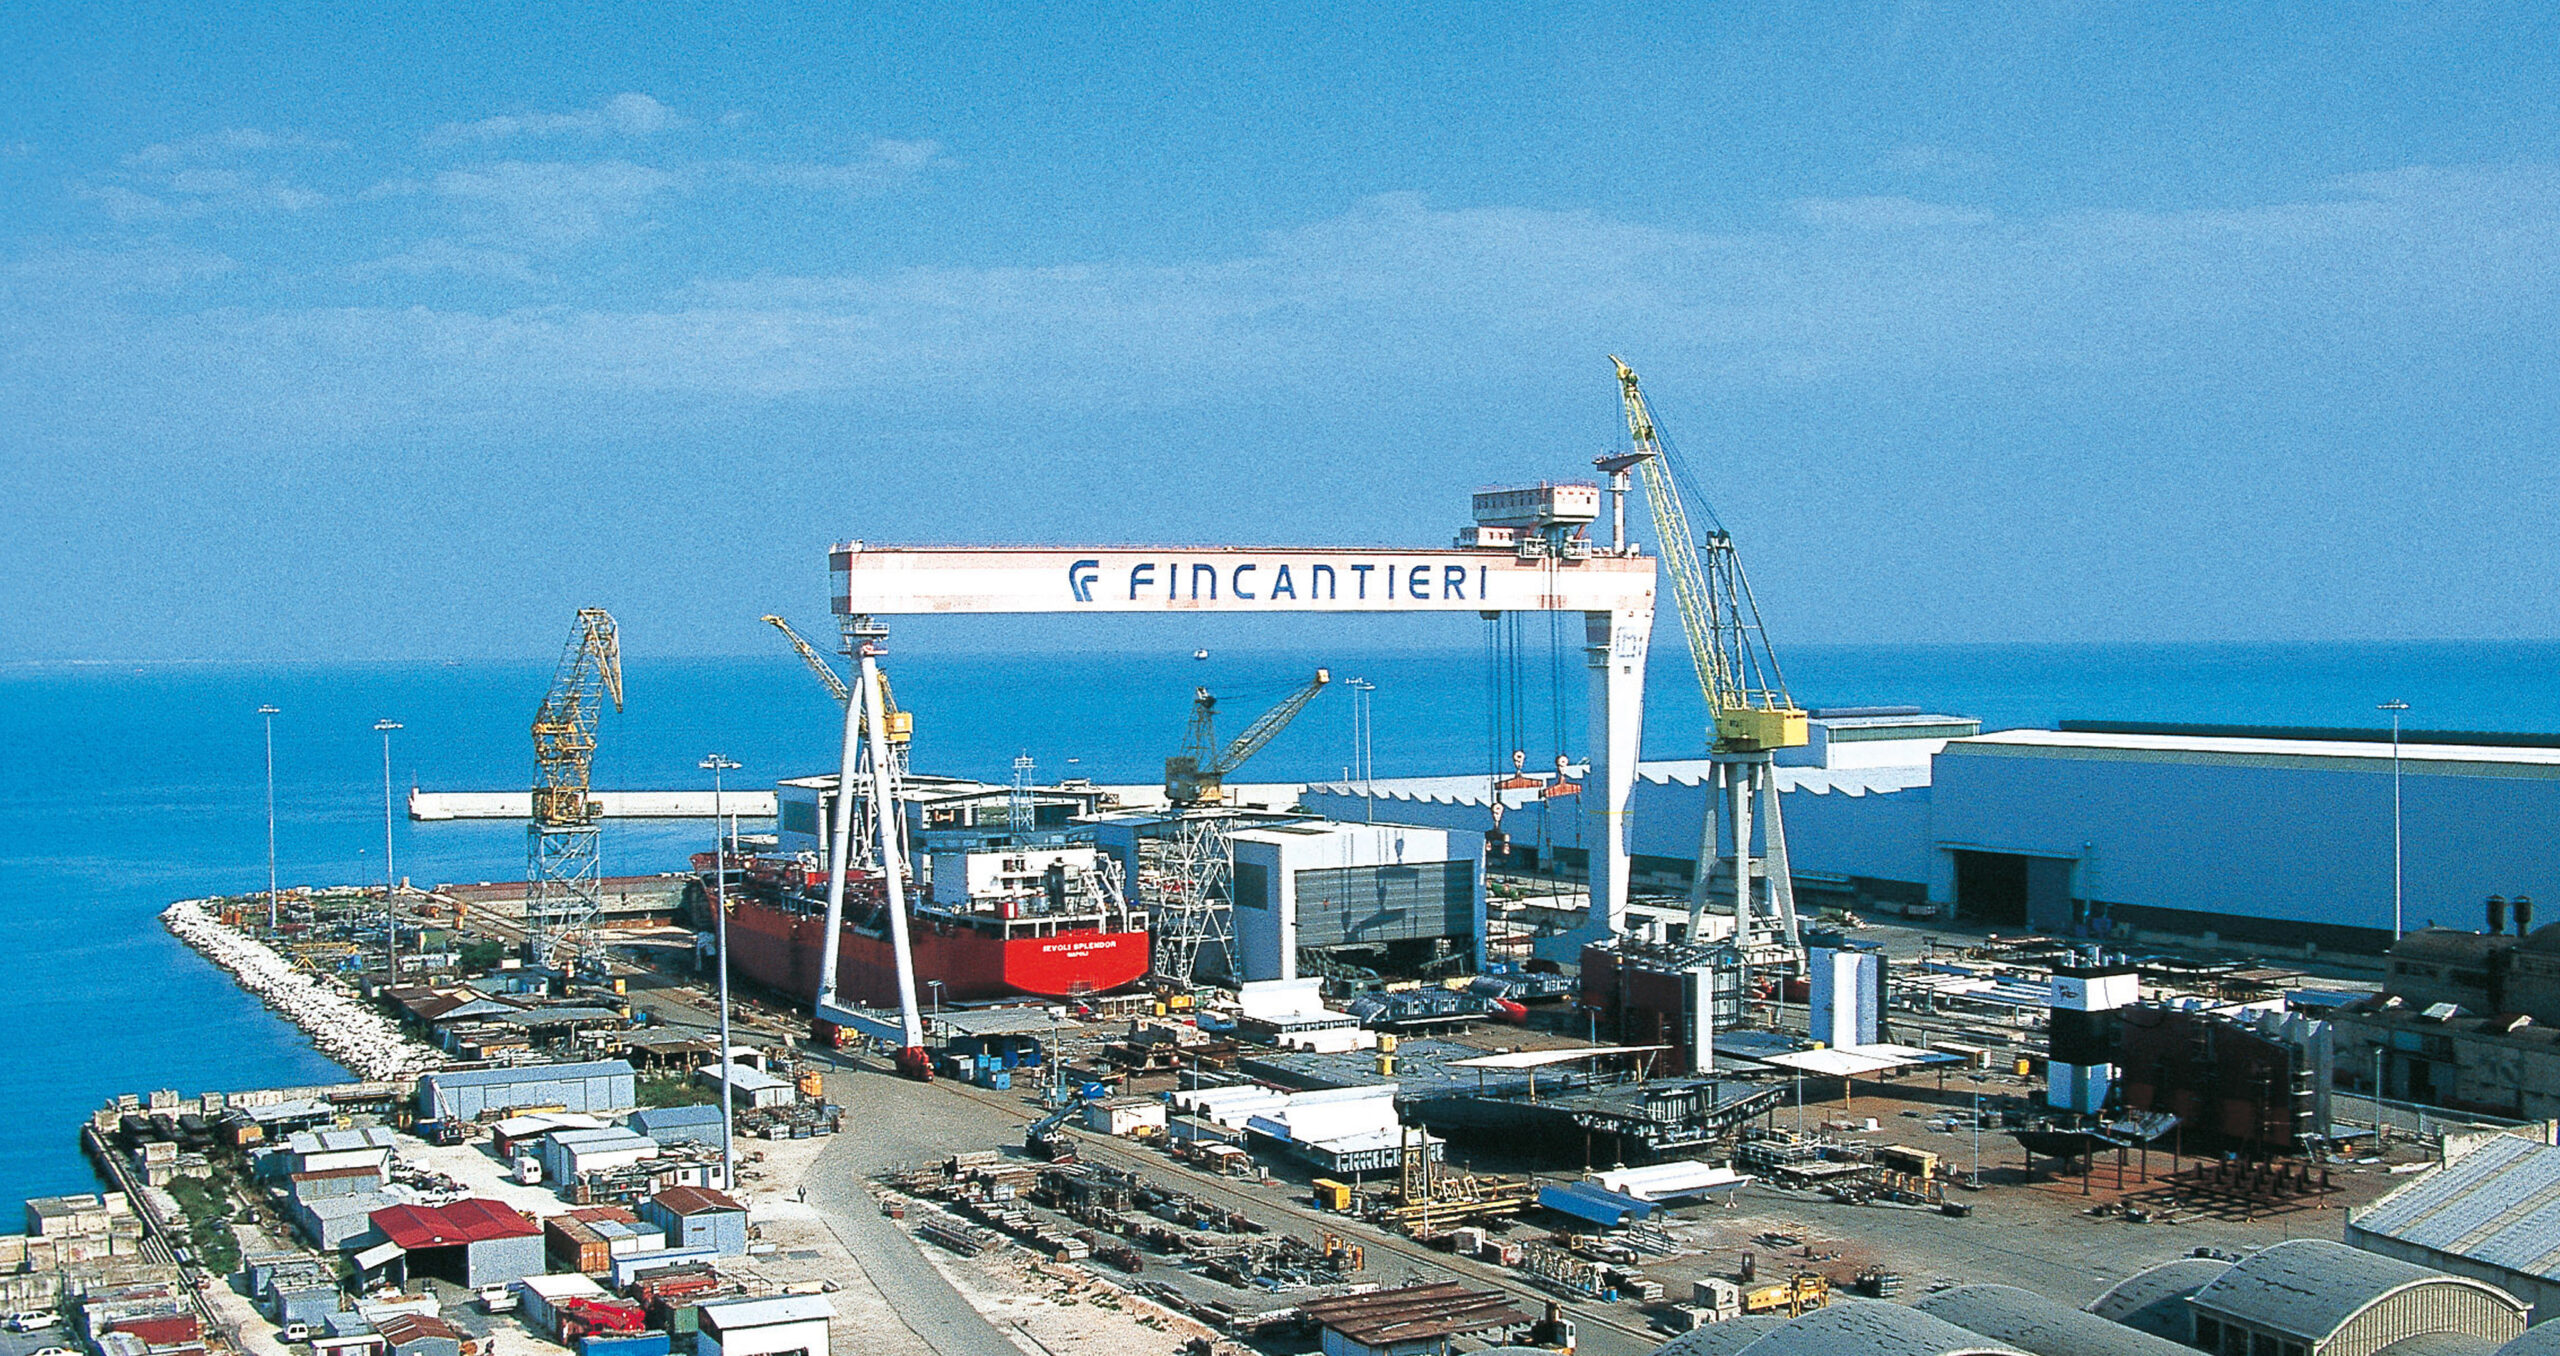 Fincantieri’s Ancona shipyard. The Italian shipbuilder is prepared to trial and validate new, low-carbon technologies to help diminish shipping’s hard-to-abate emissions, says its CEO
(Credit: Fincantieri) 